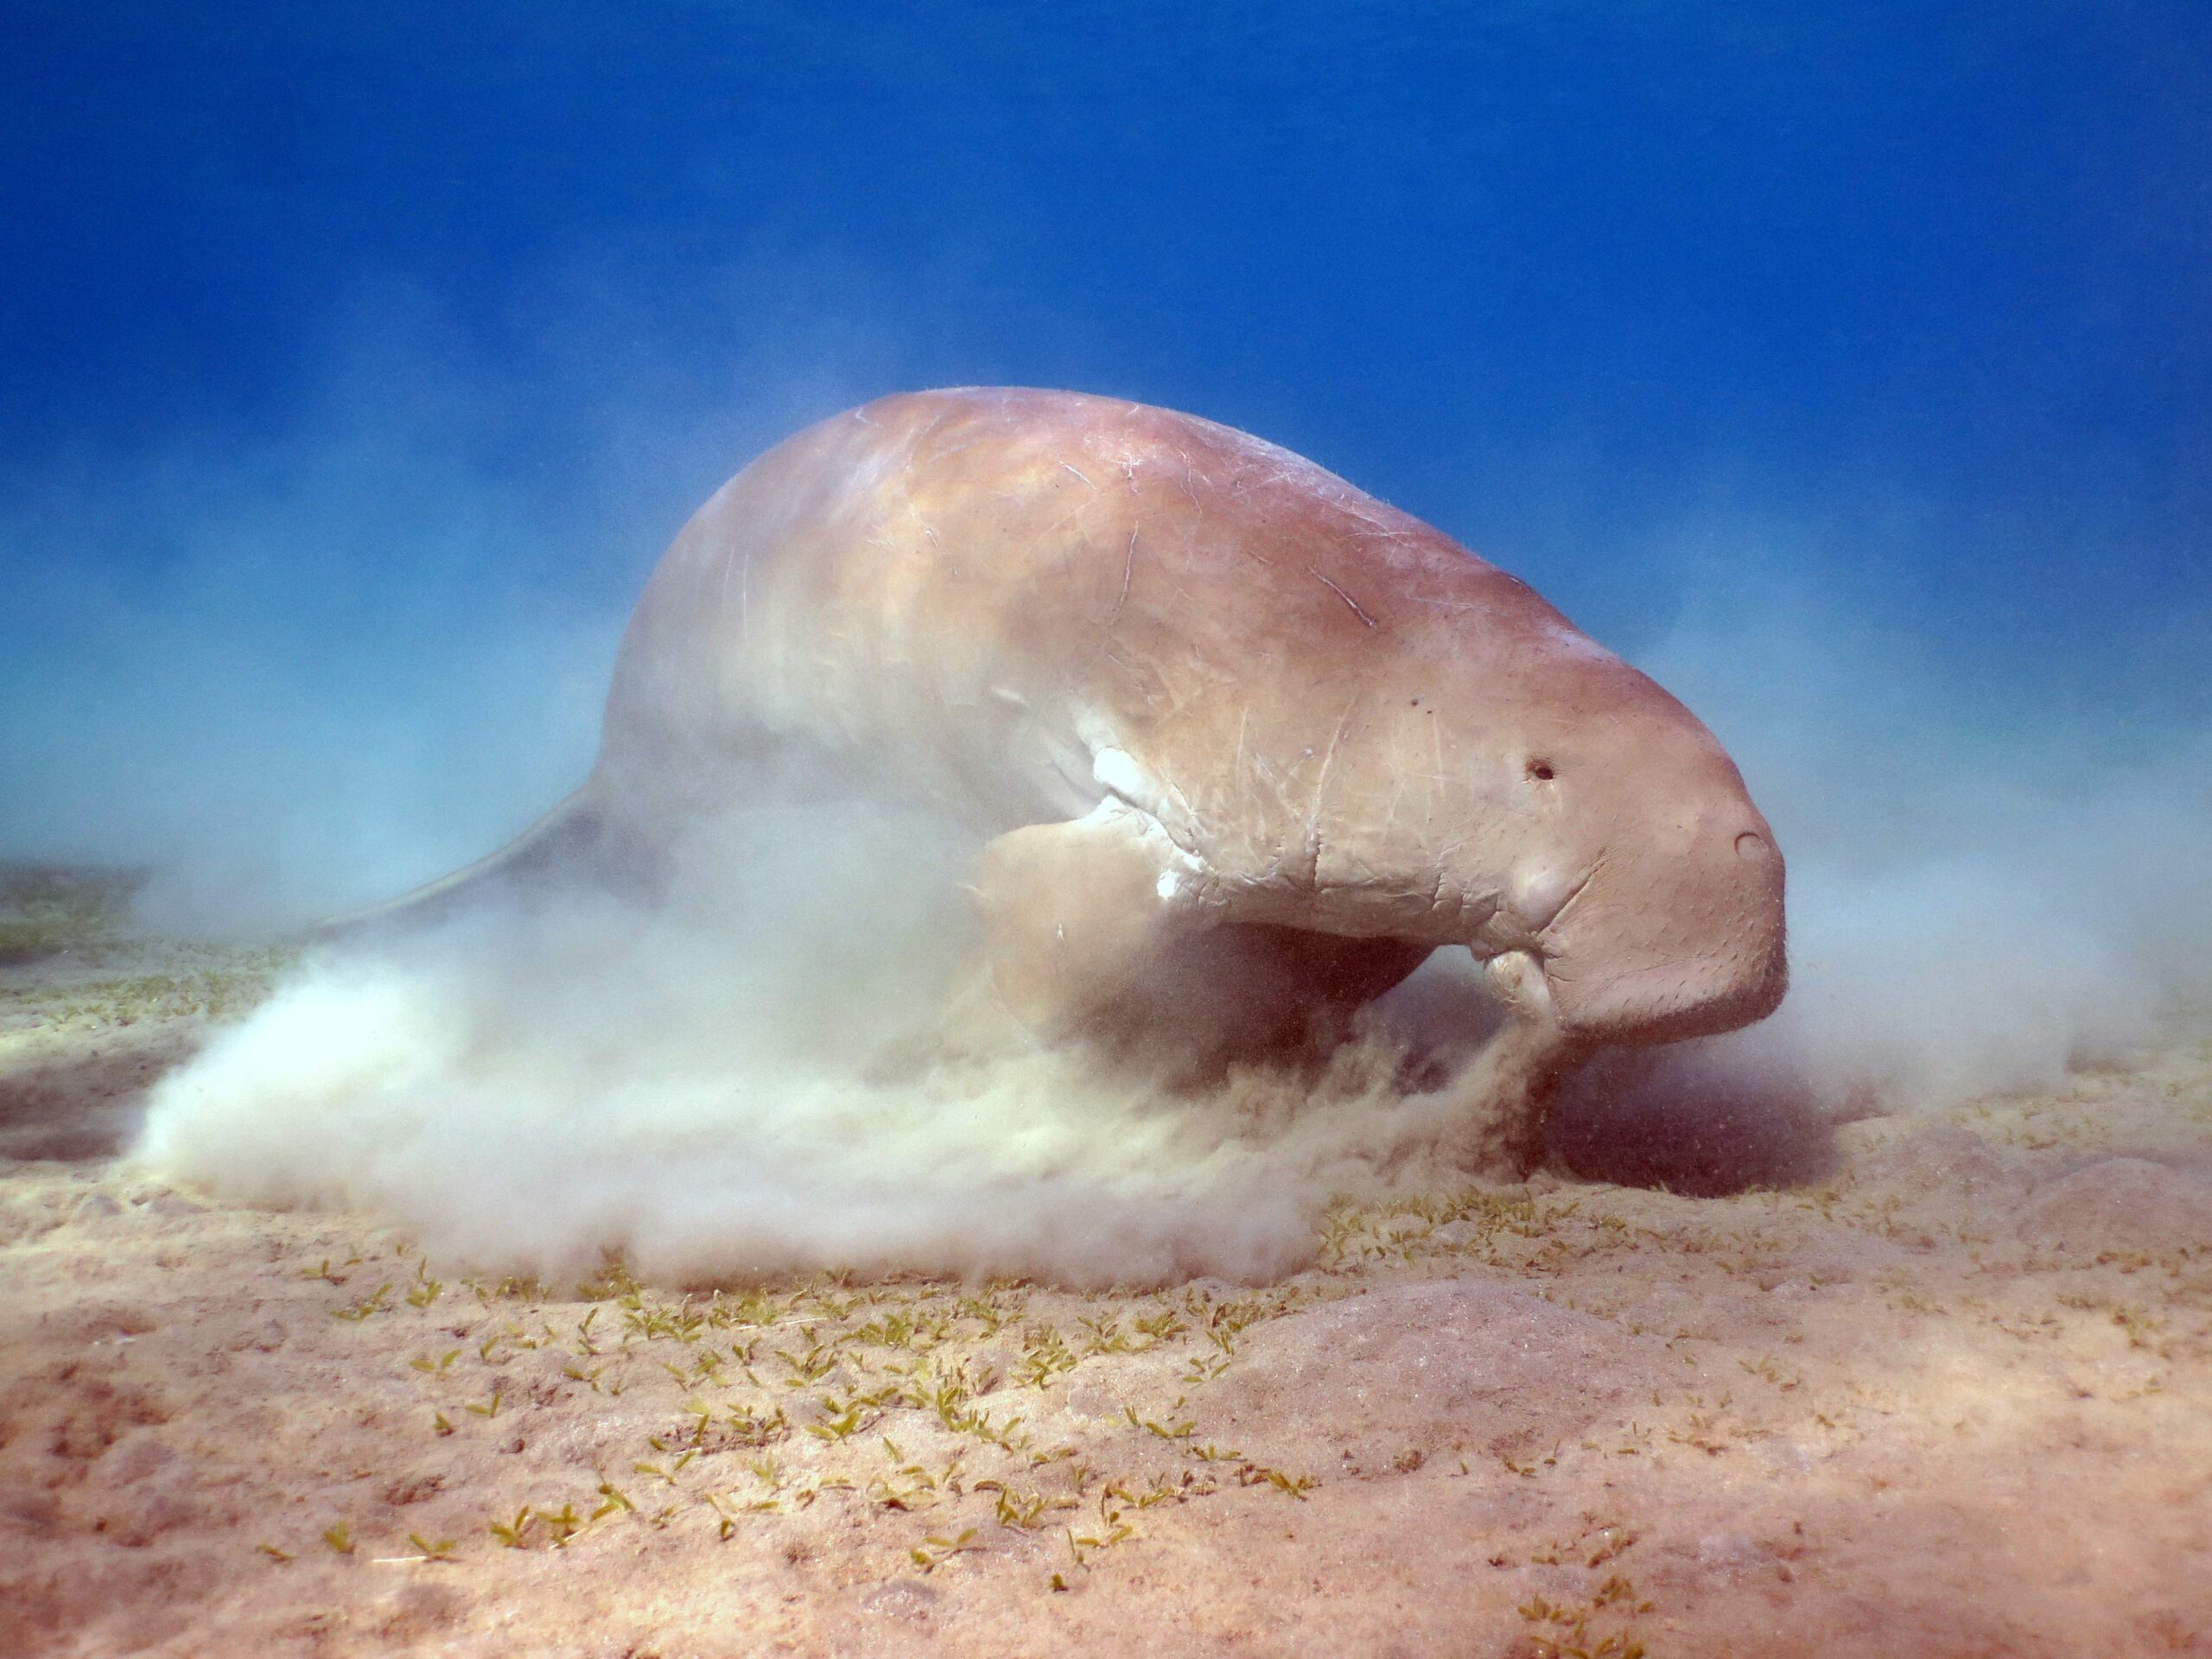 Dugong Defenders to Rally Monday at S.F. Hearing on U.S. Airbase’s Threat to Endangered Animals